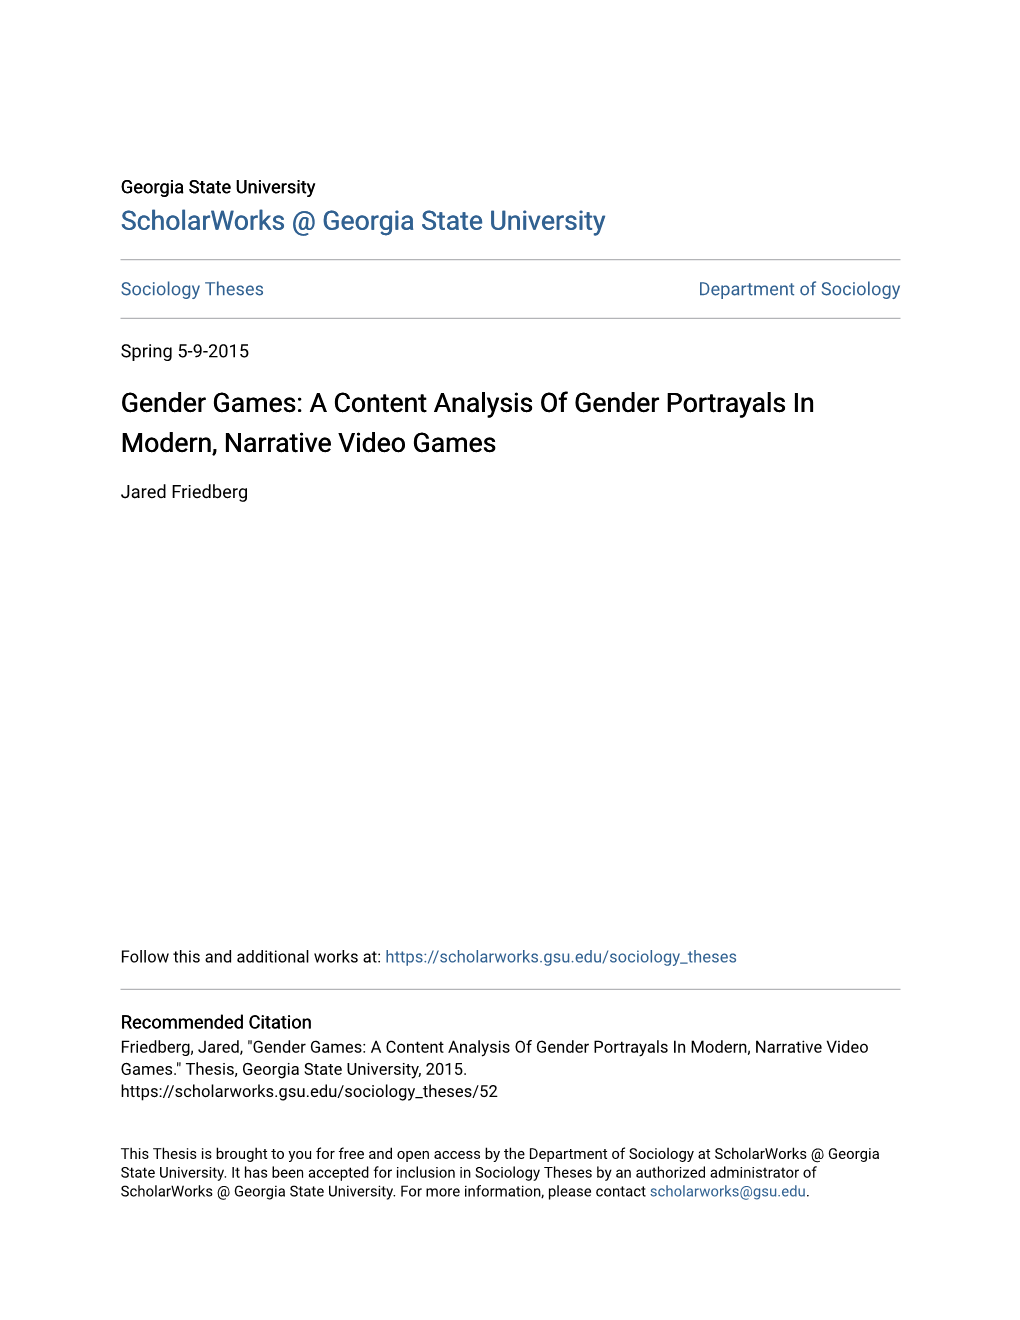 Gender Games: a Content Analysis of Gender Portrayals in Modern, Narrative Video Games